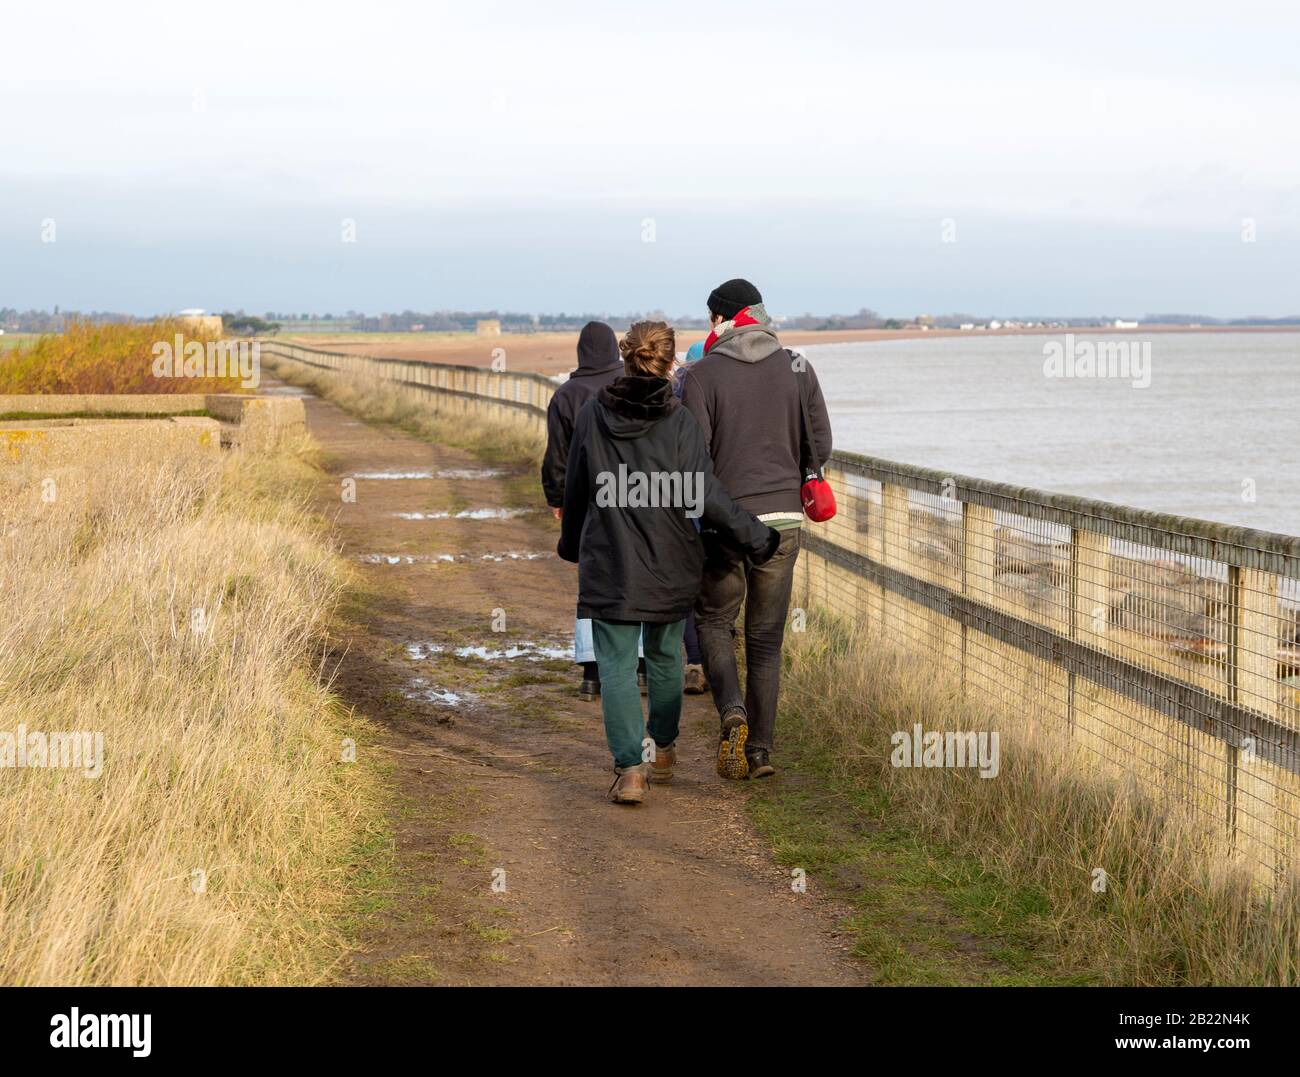 View from behind of people wearing winter coats walking on path by North Sea coast, Bawdsey, Suffolk, England, UK Stock Photo